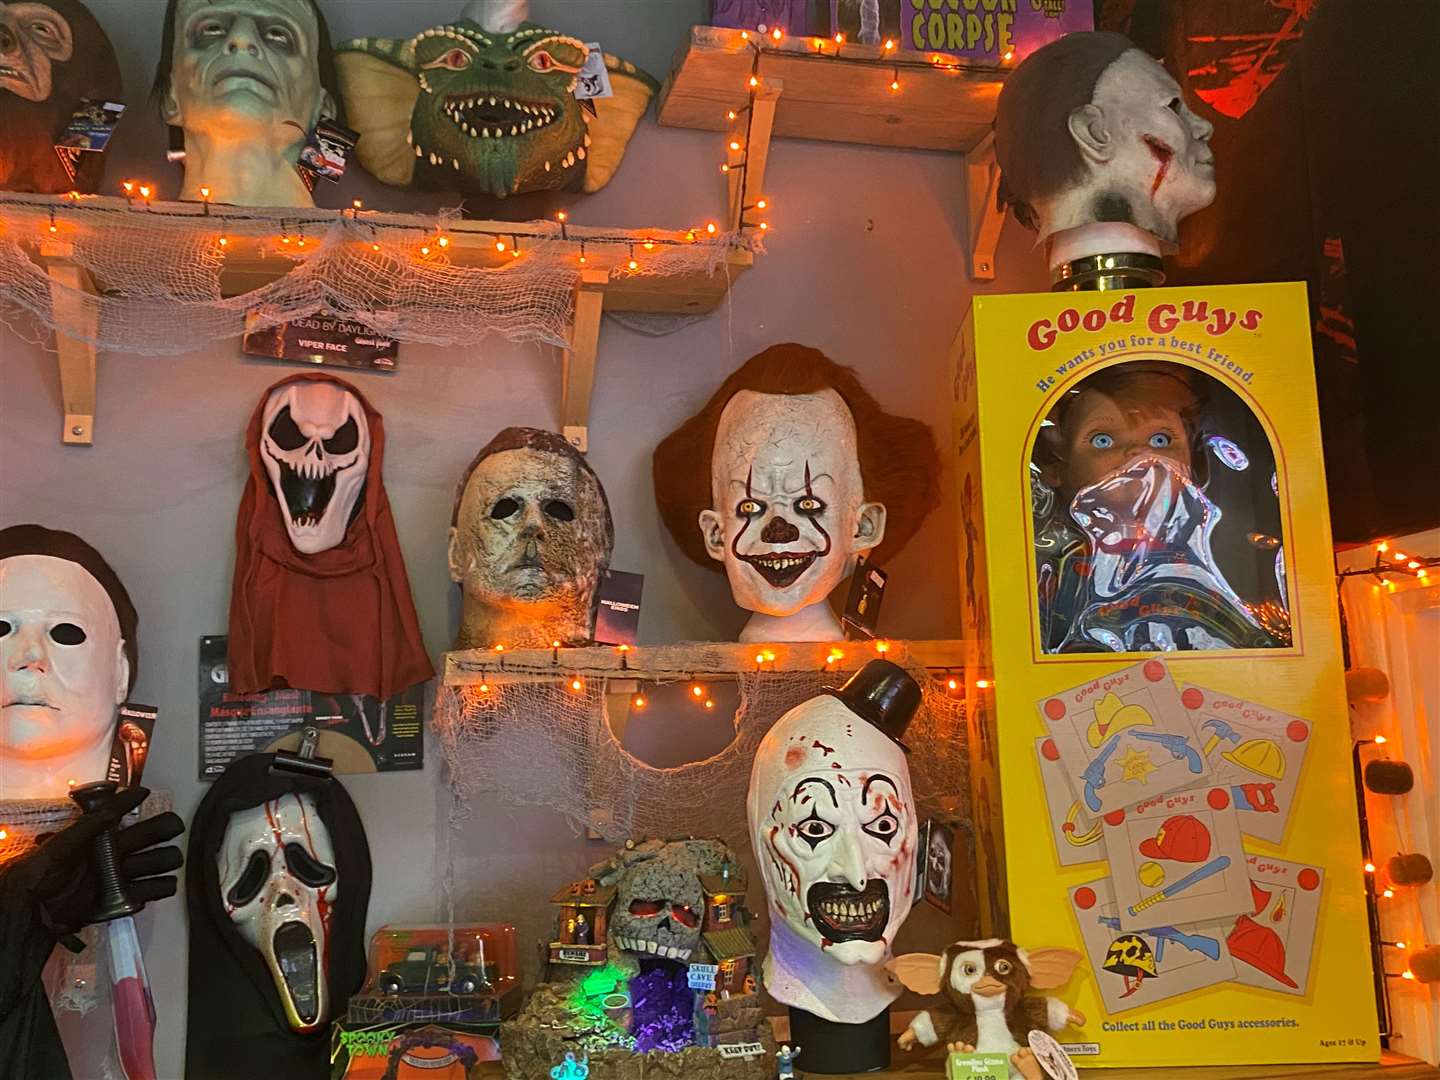 A lot of the masks are from popular American horror films, including Scream, Halloween, It and Terrifier